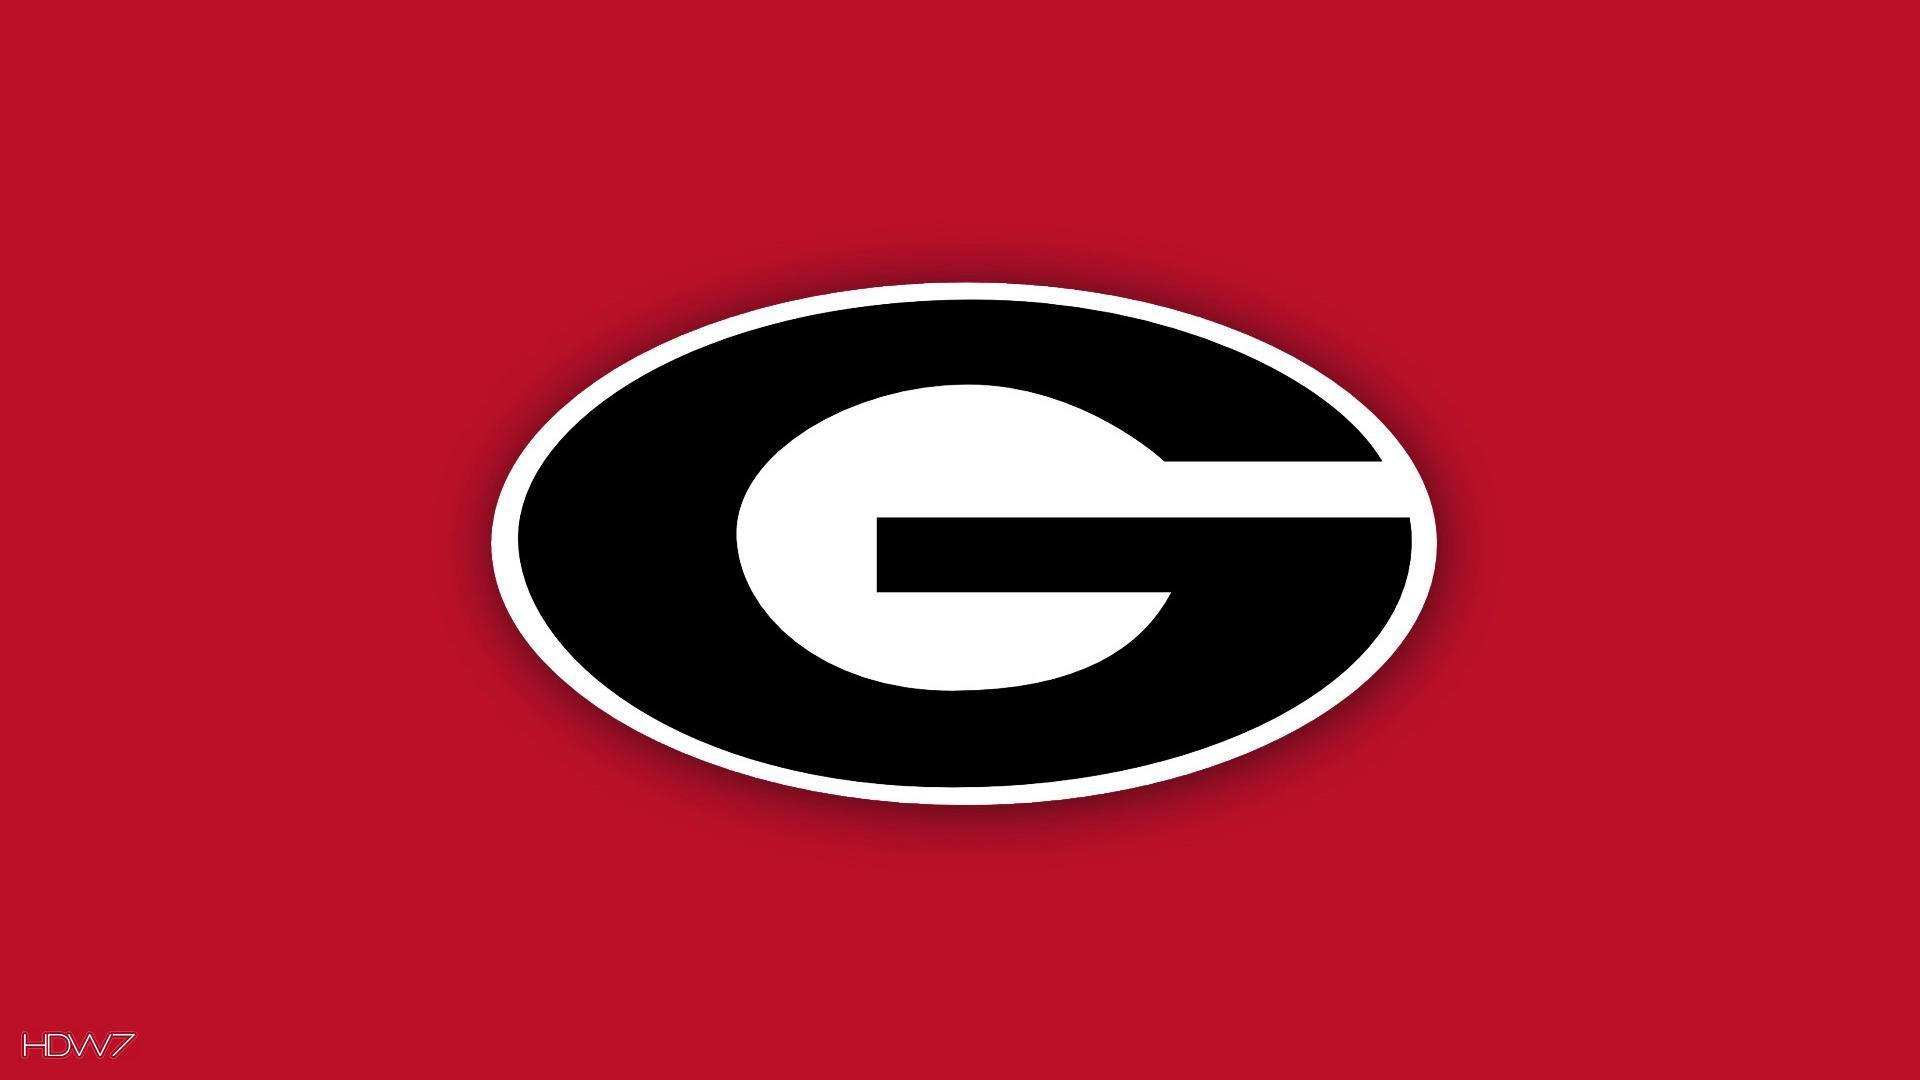 Wallpaper Blink of Georgia Bulldogs Wallpaper HD for Android